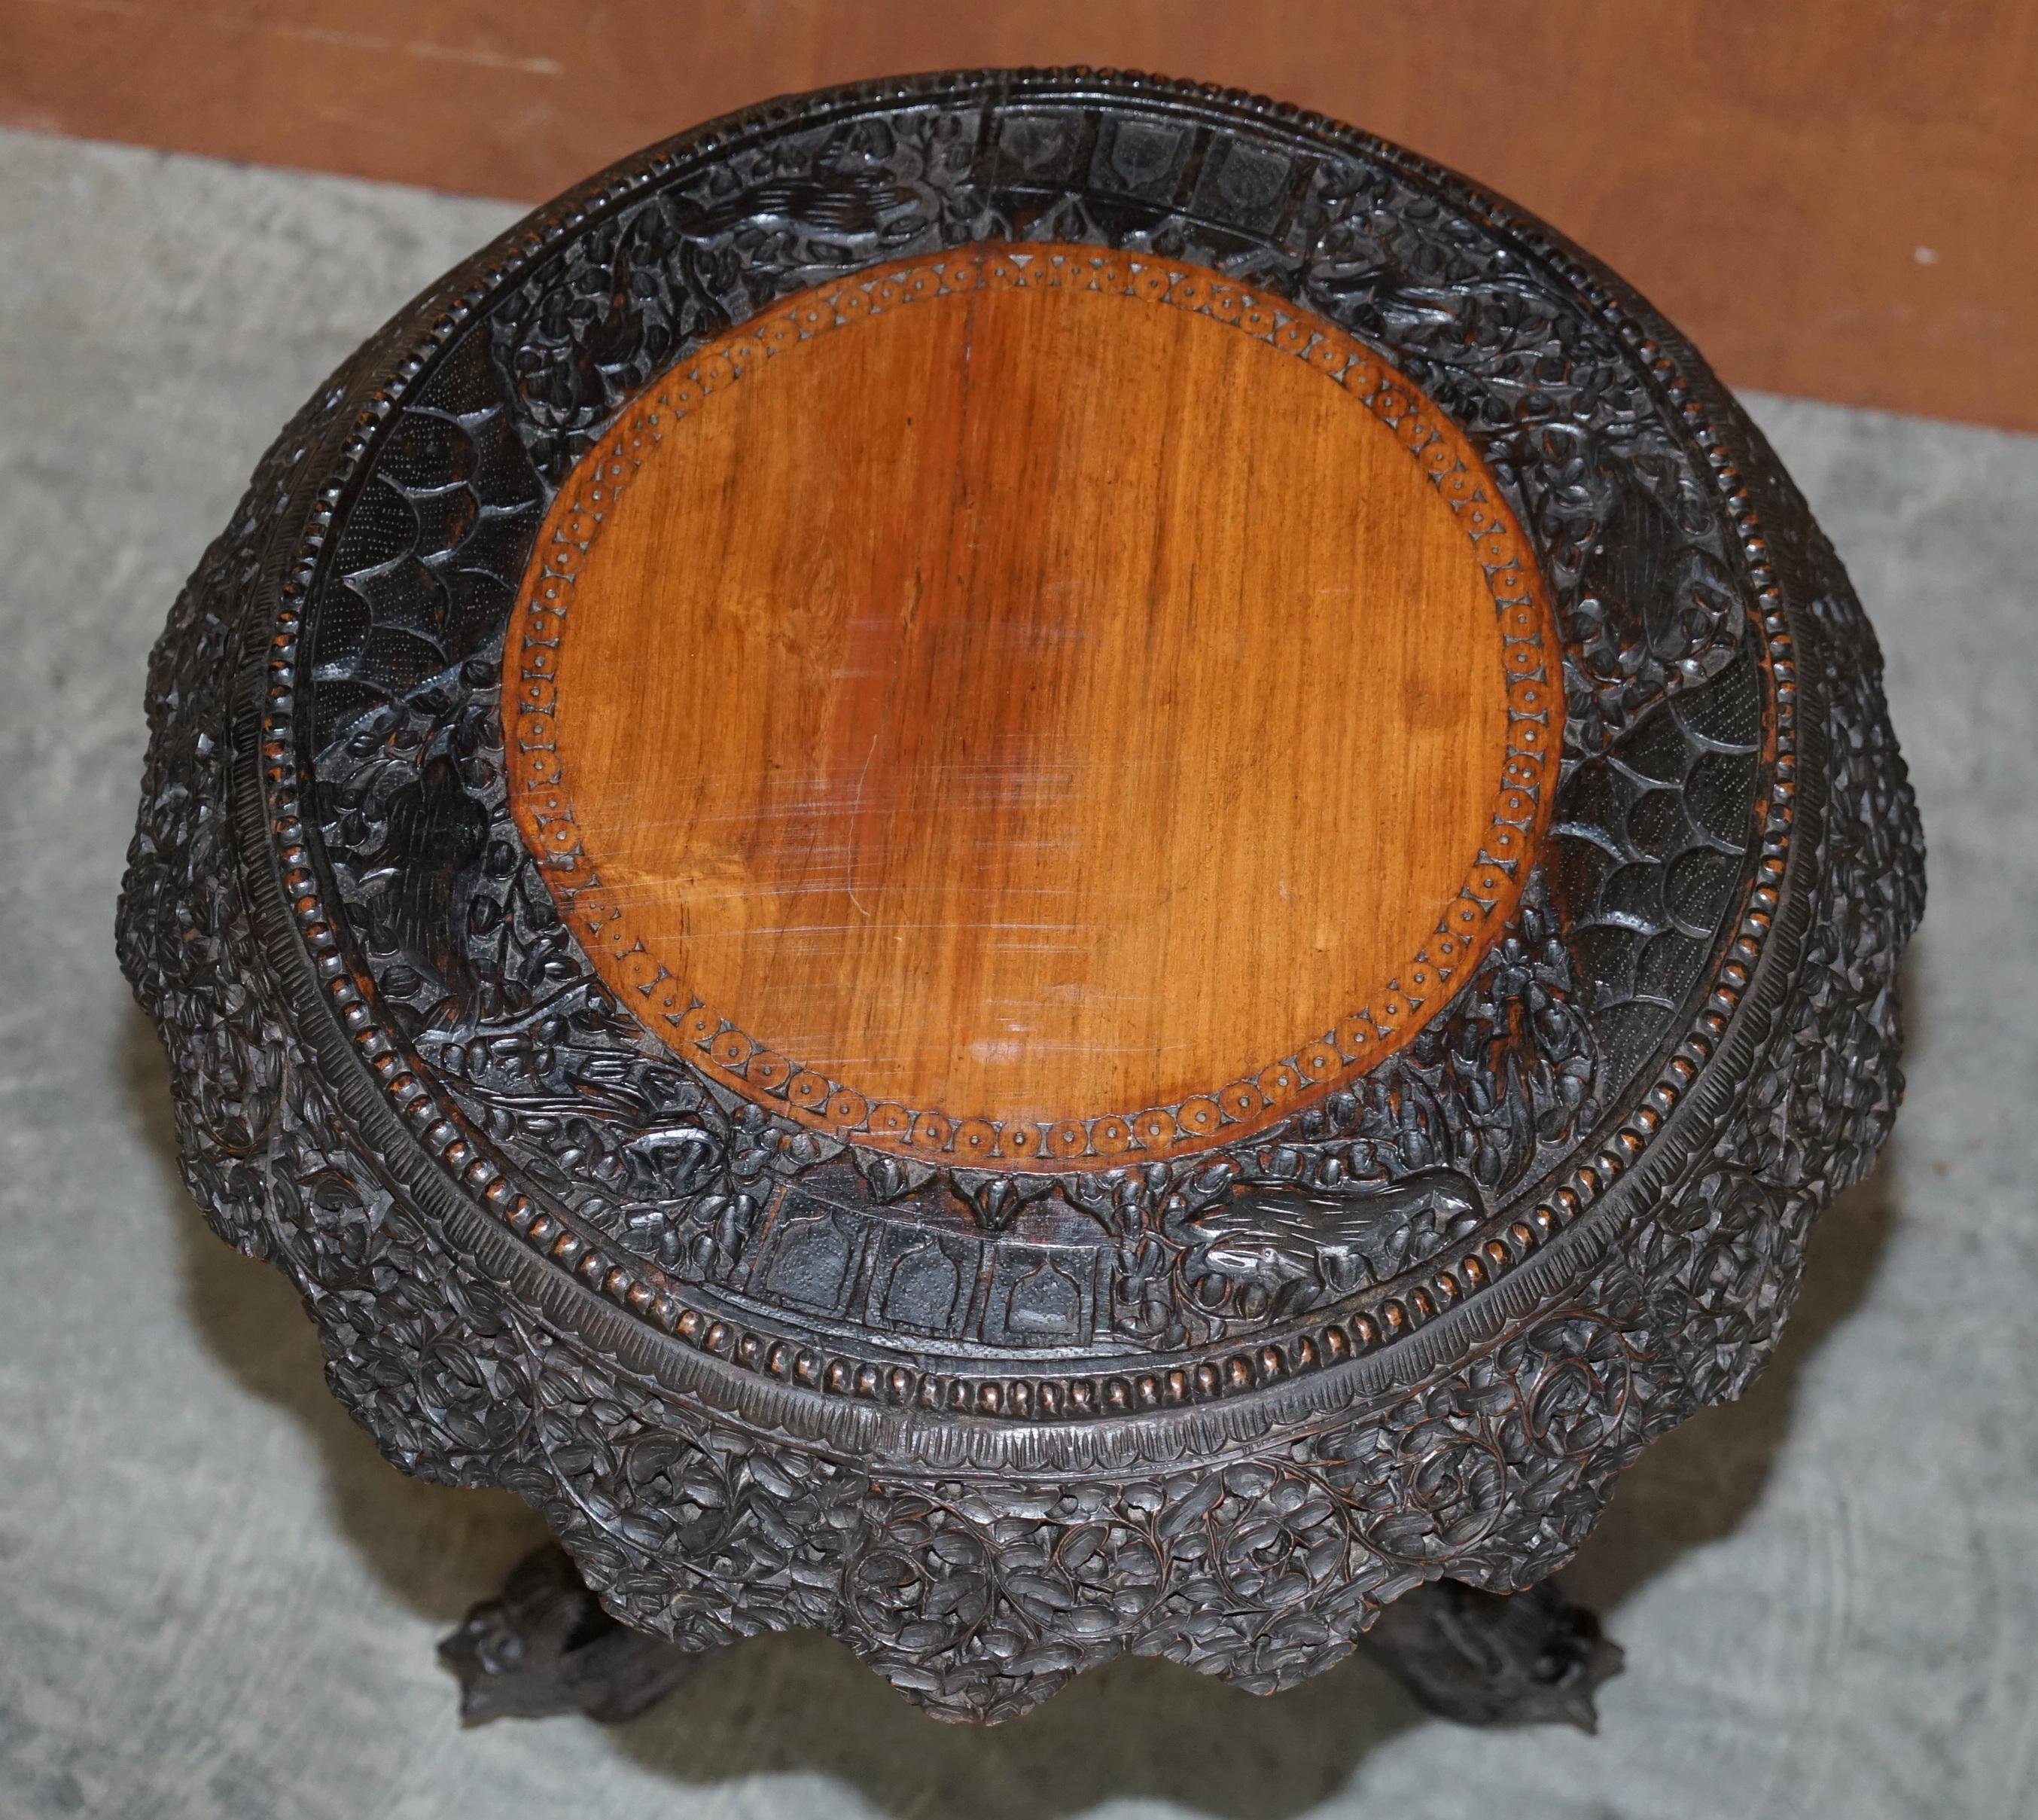 We are delighted to offer for sale this stunning circa 1880 Anglo Indian hand carved table in solid hardwood.

A very good looking and collectable table, originally designed as a centre or occasional table table however by western standards it